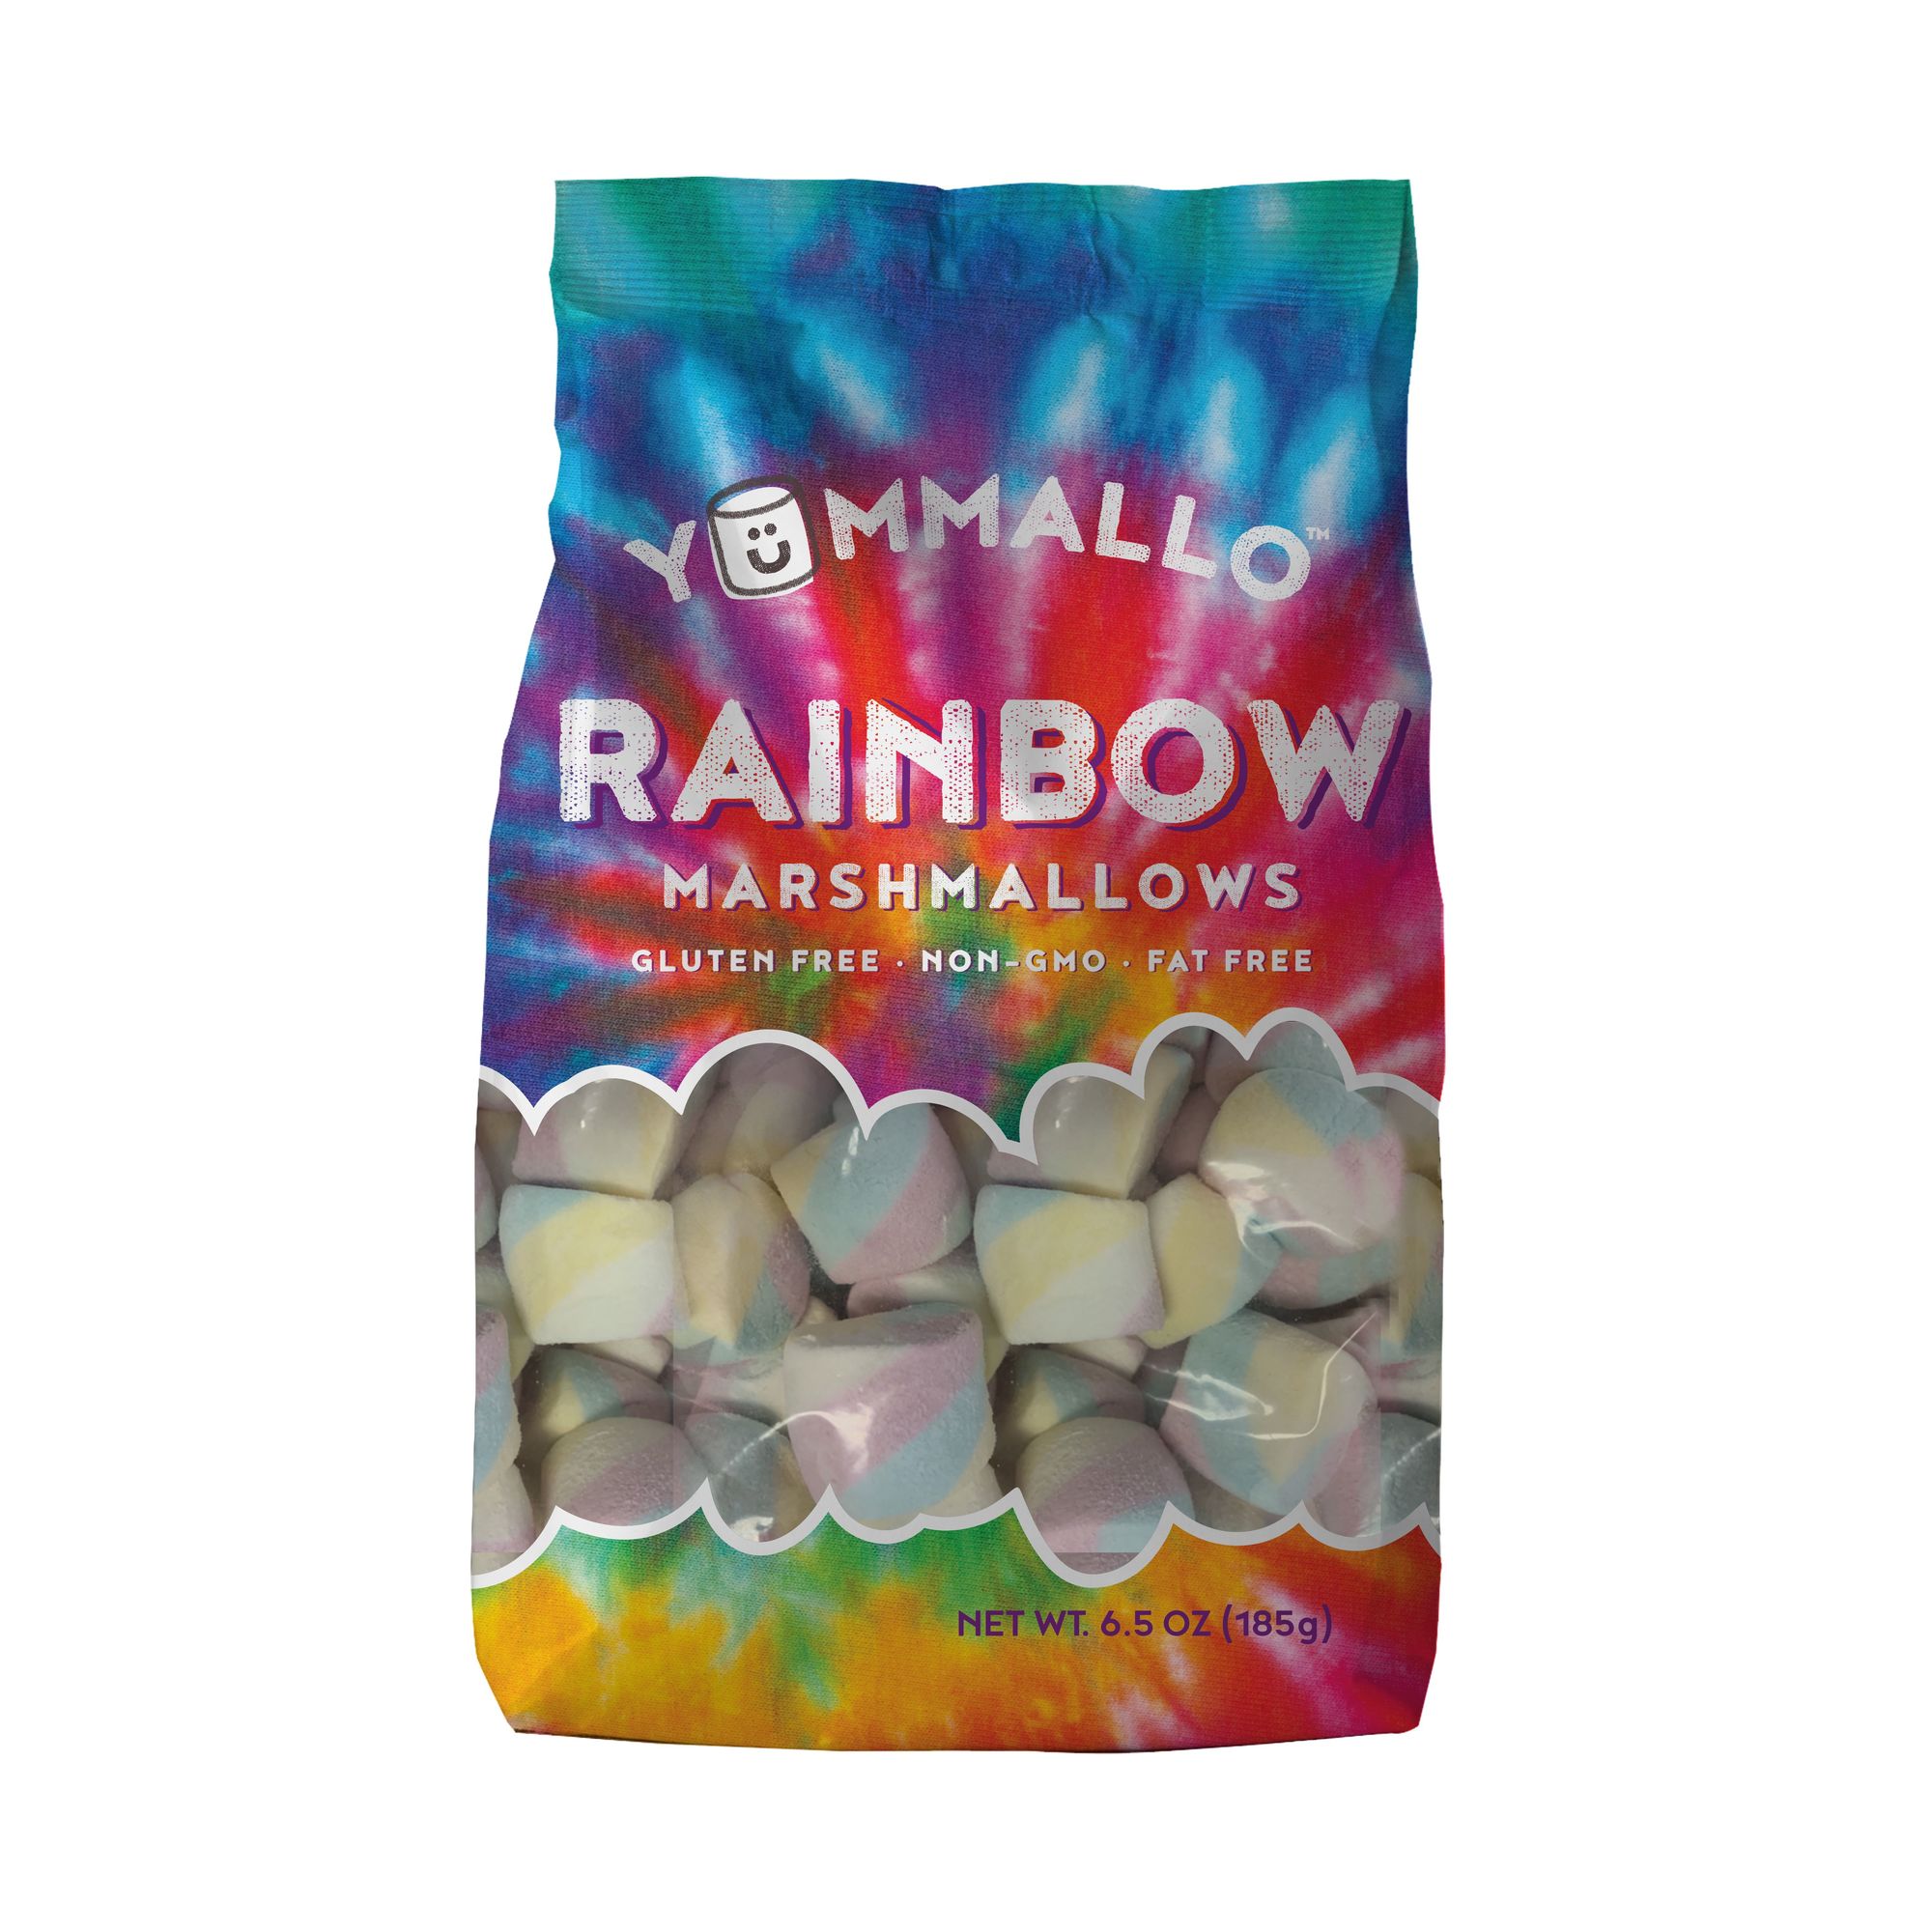 Yummallo Yummix Rainbow Marshmallows, Great for Desserts, Gifts and Easter